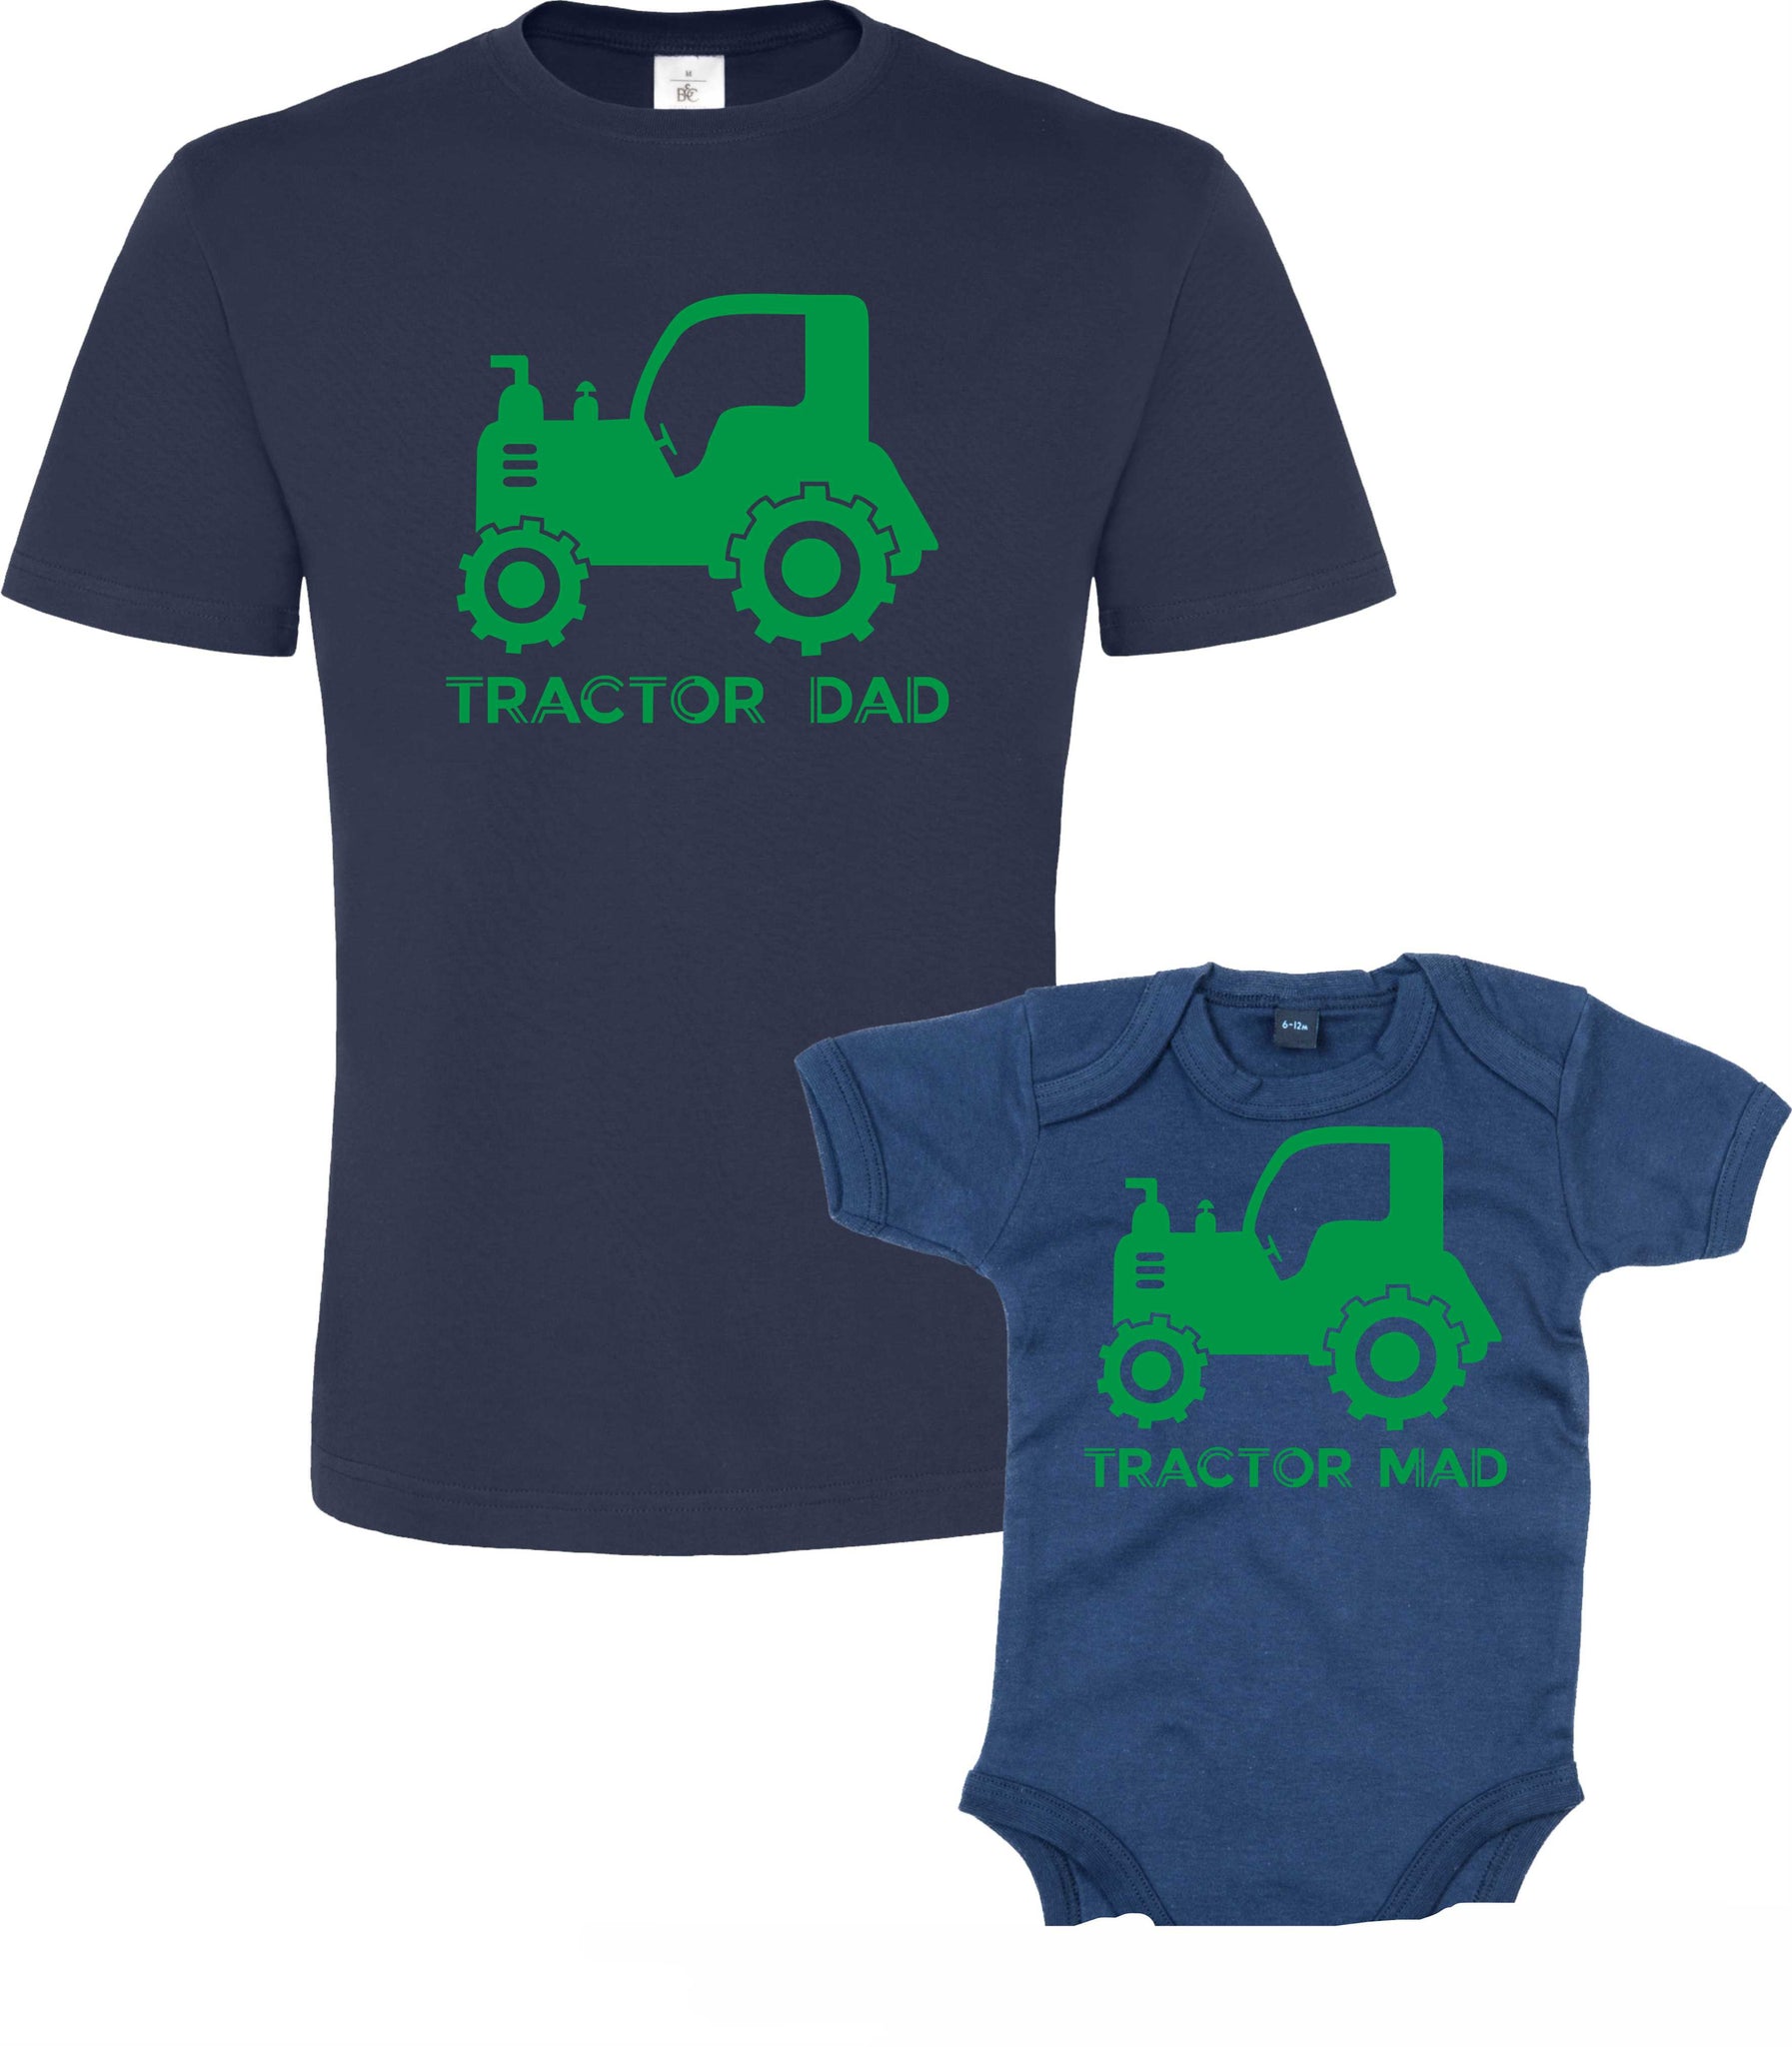 Tractor Dad and Tractor Mad T Shirt and Bodysuit Set